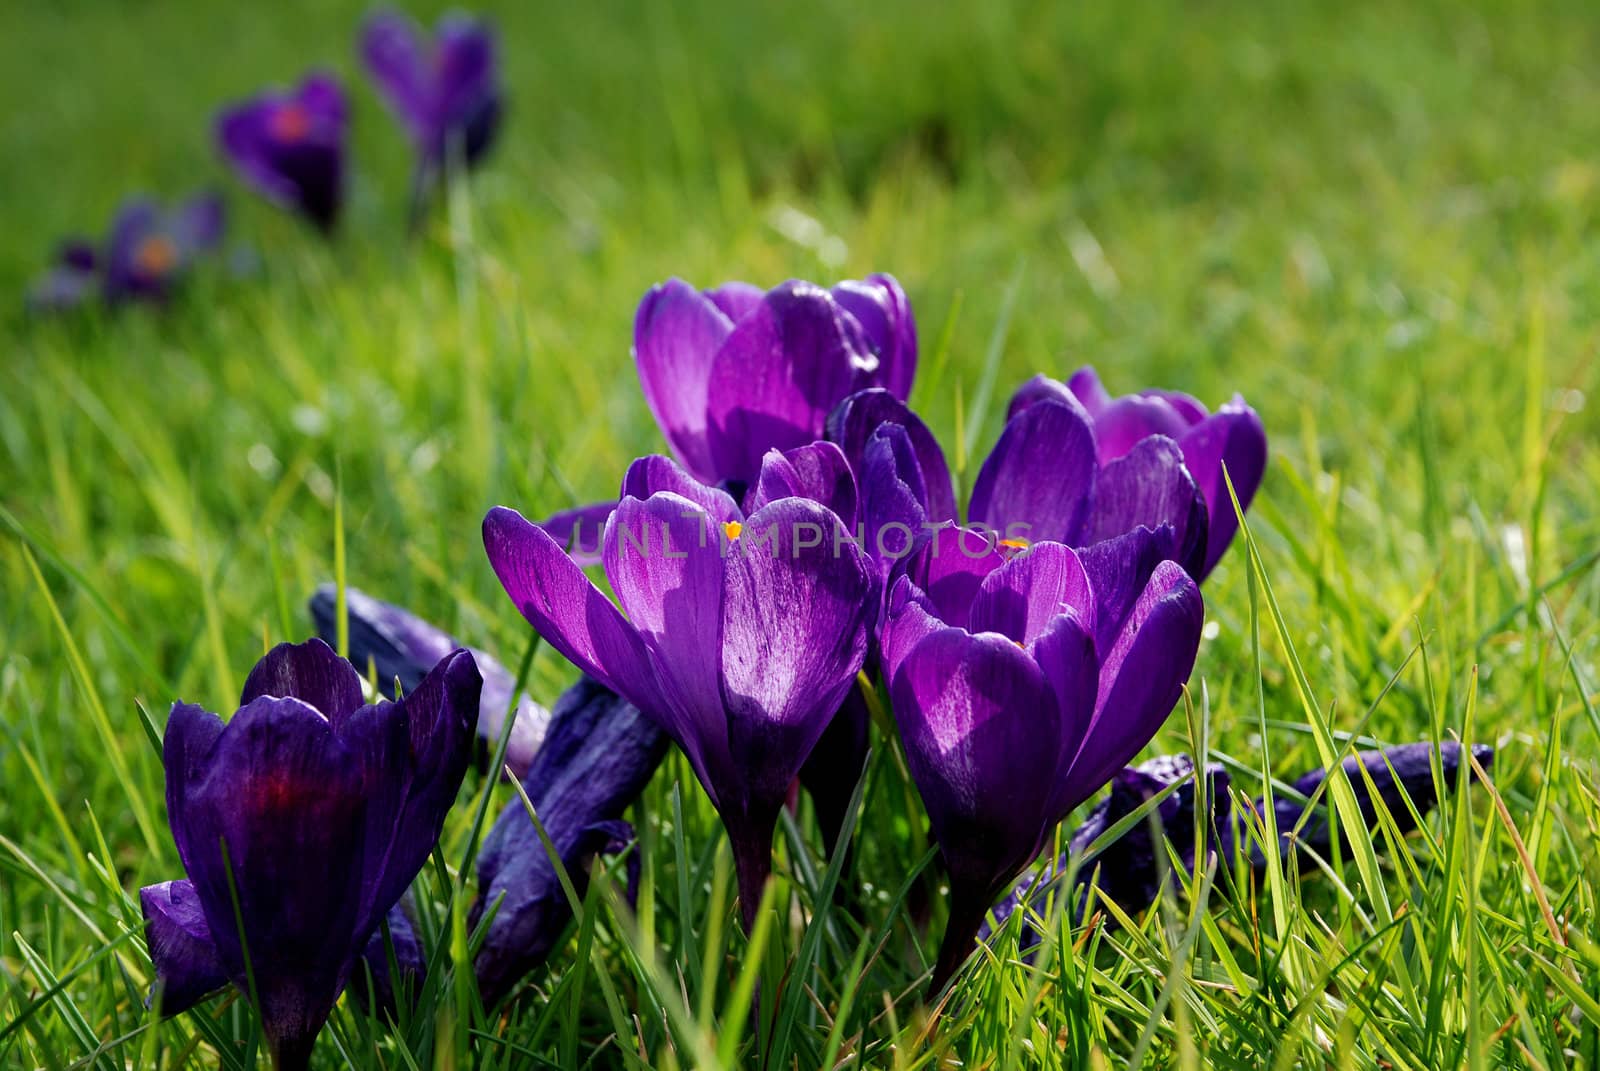 Ground level view of purple crocuses in the beautiful spring sunshine